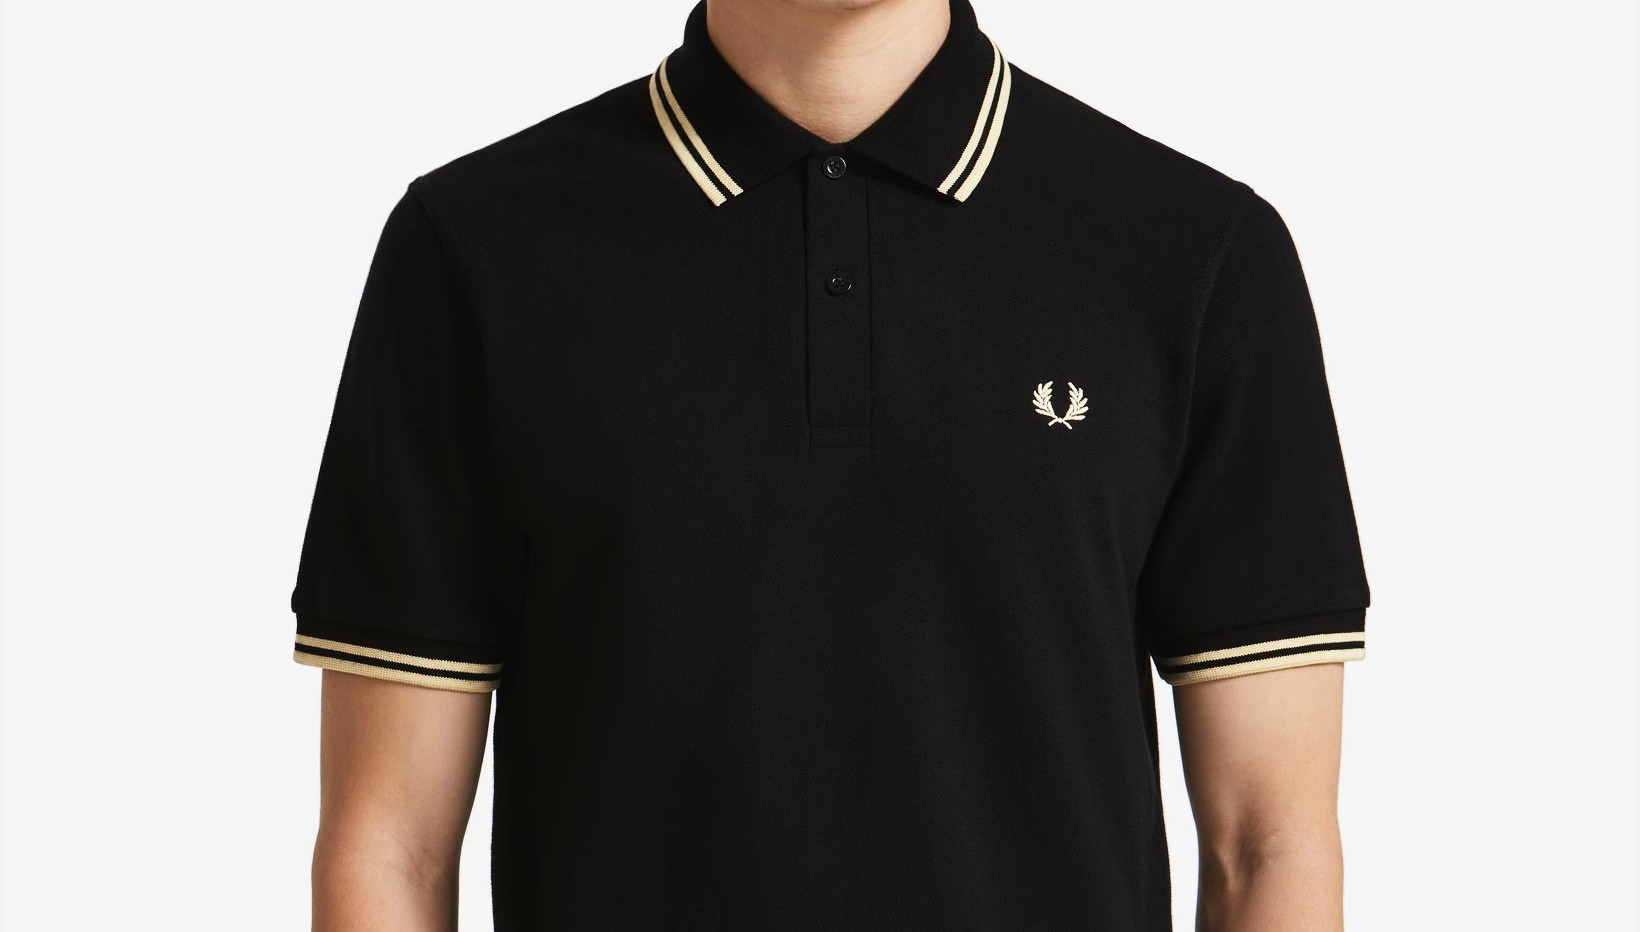 inkomen George Eliot Leed De Fred Perry polo populair in Terrace Culture sinds de jare -  Voetbalshirts.com